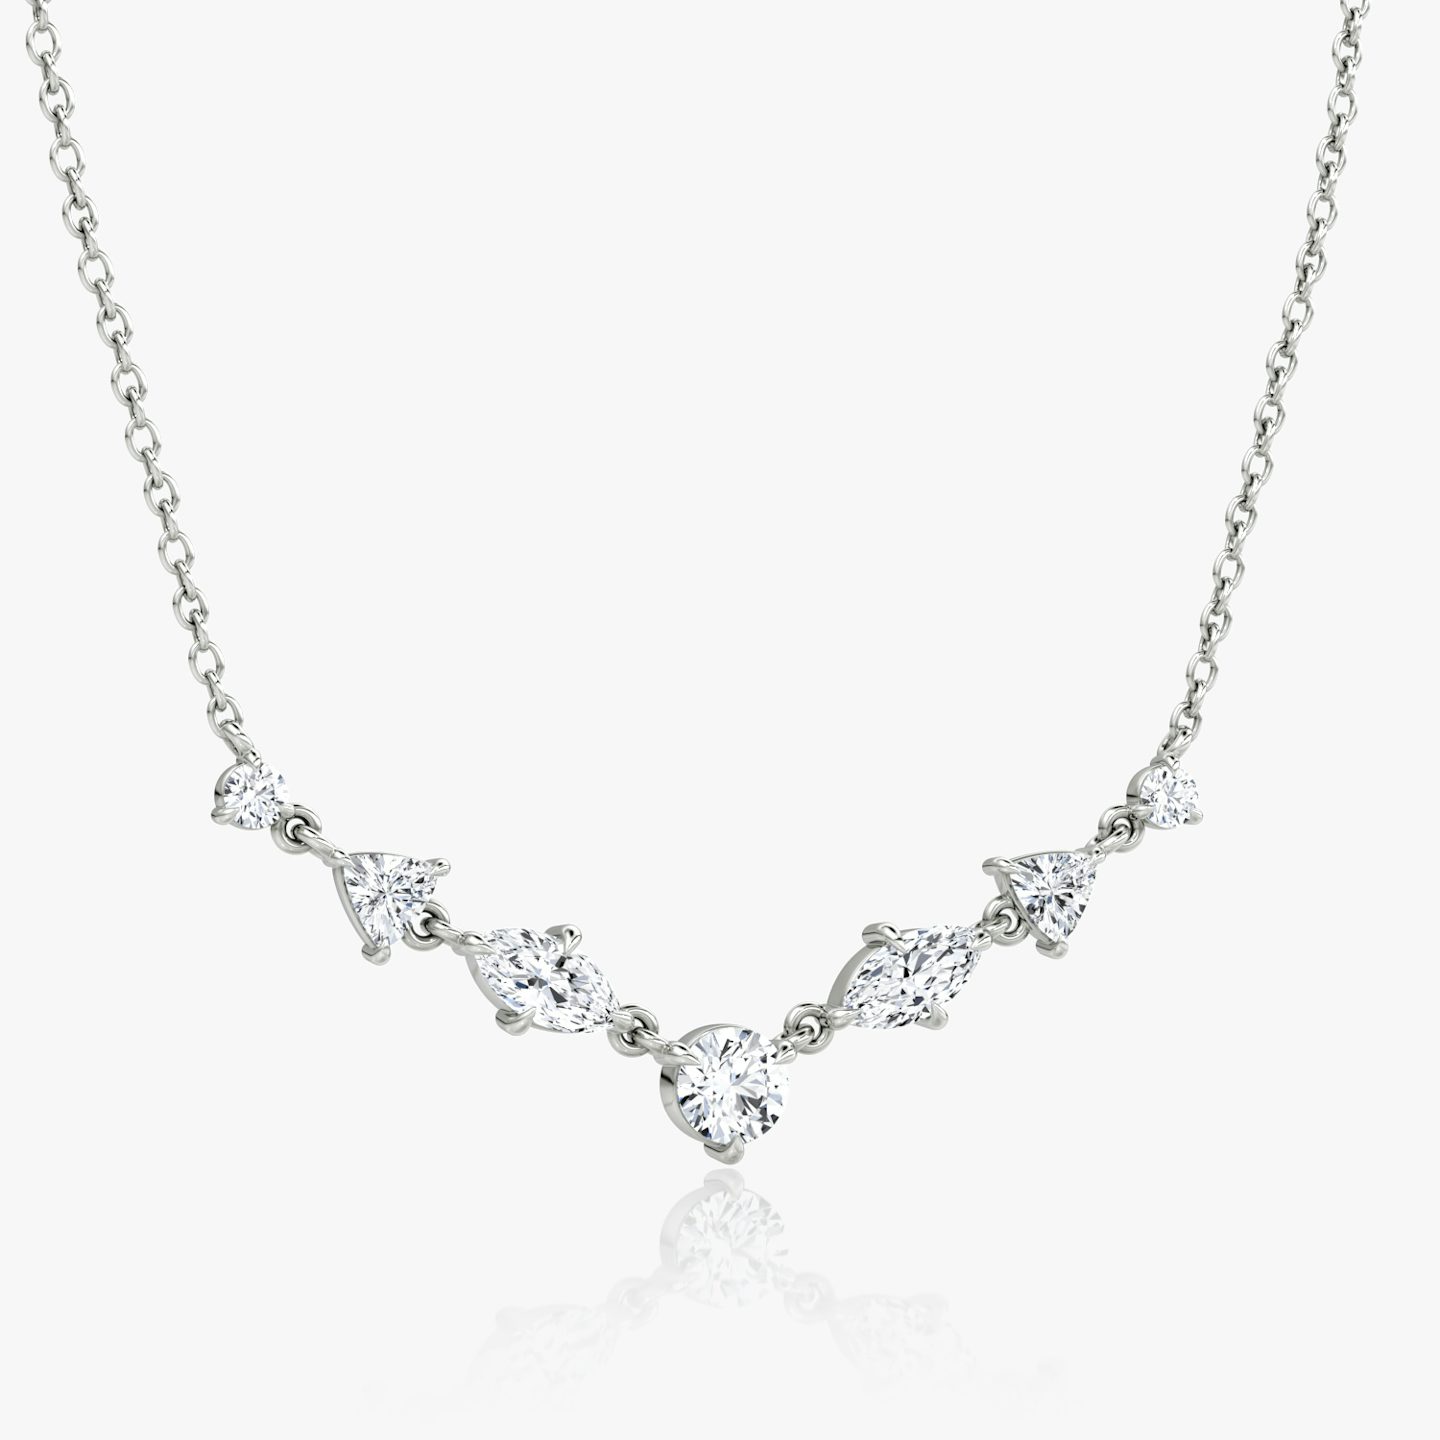 undefined | 14k | Or blanc | diamondtype: round-brilliant+marquise+trillion | chainLength: 16-18